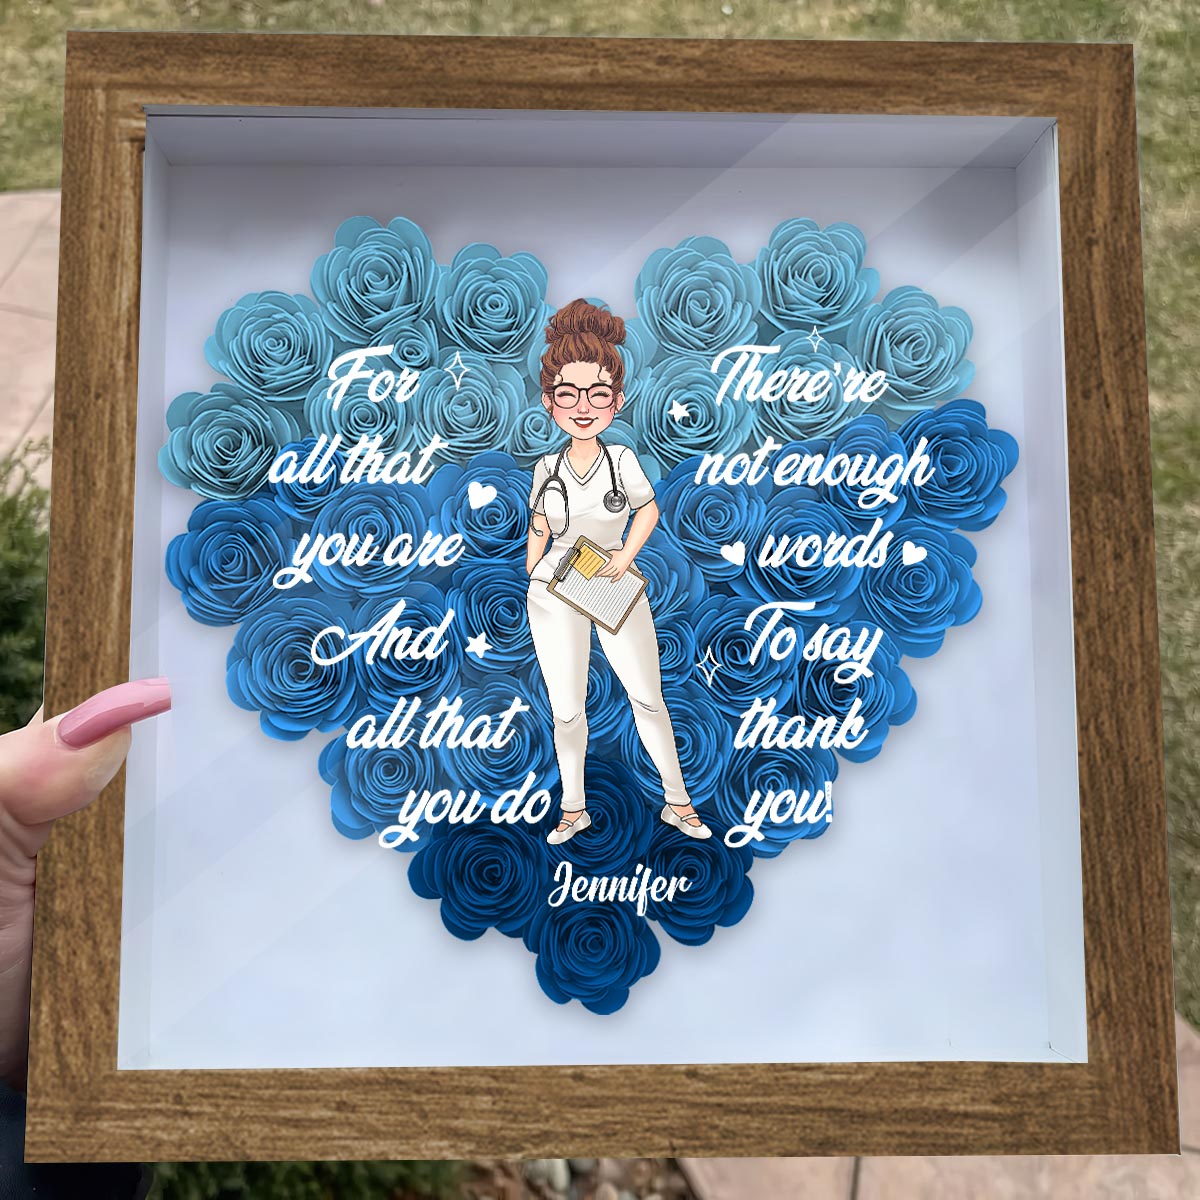 Discover For All That You Are - Personalized Nurse Flower Frame Box